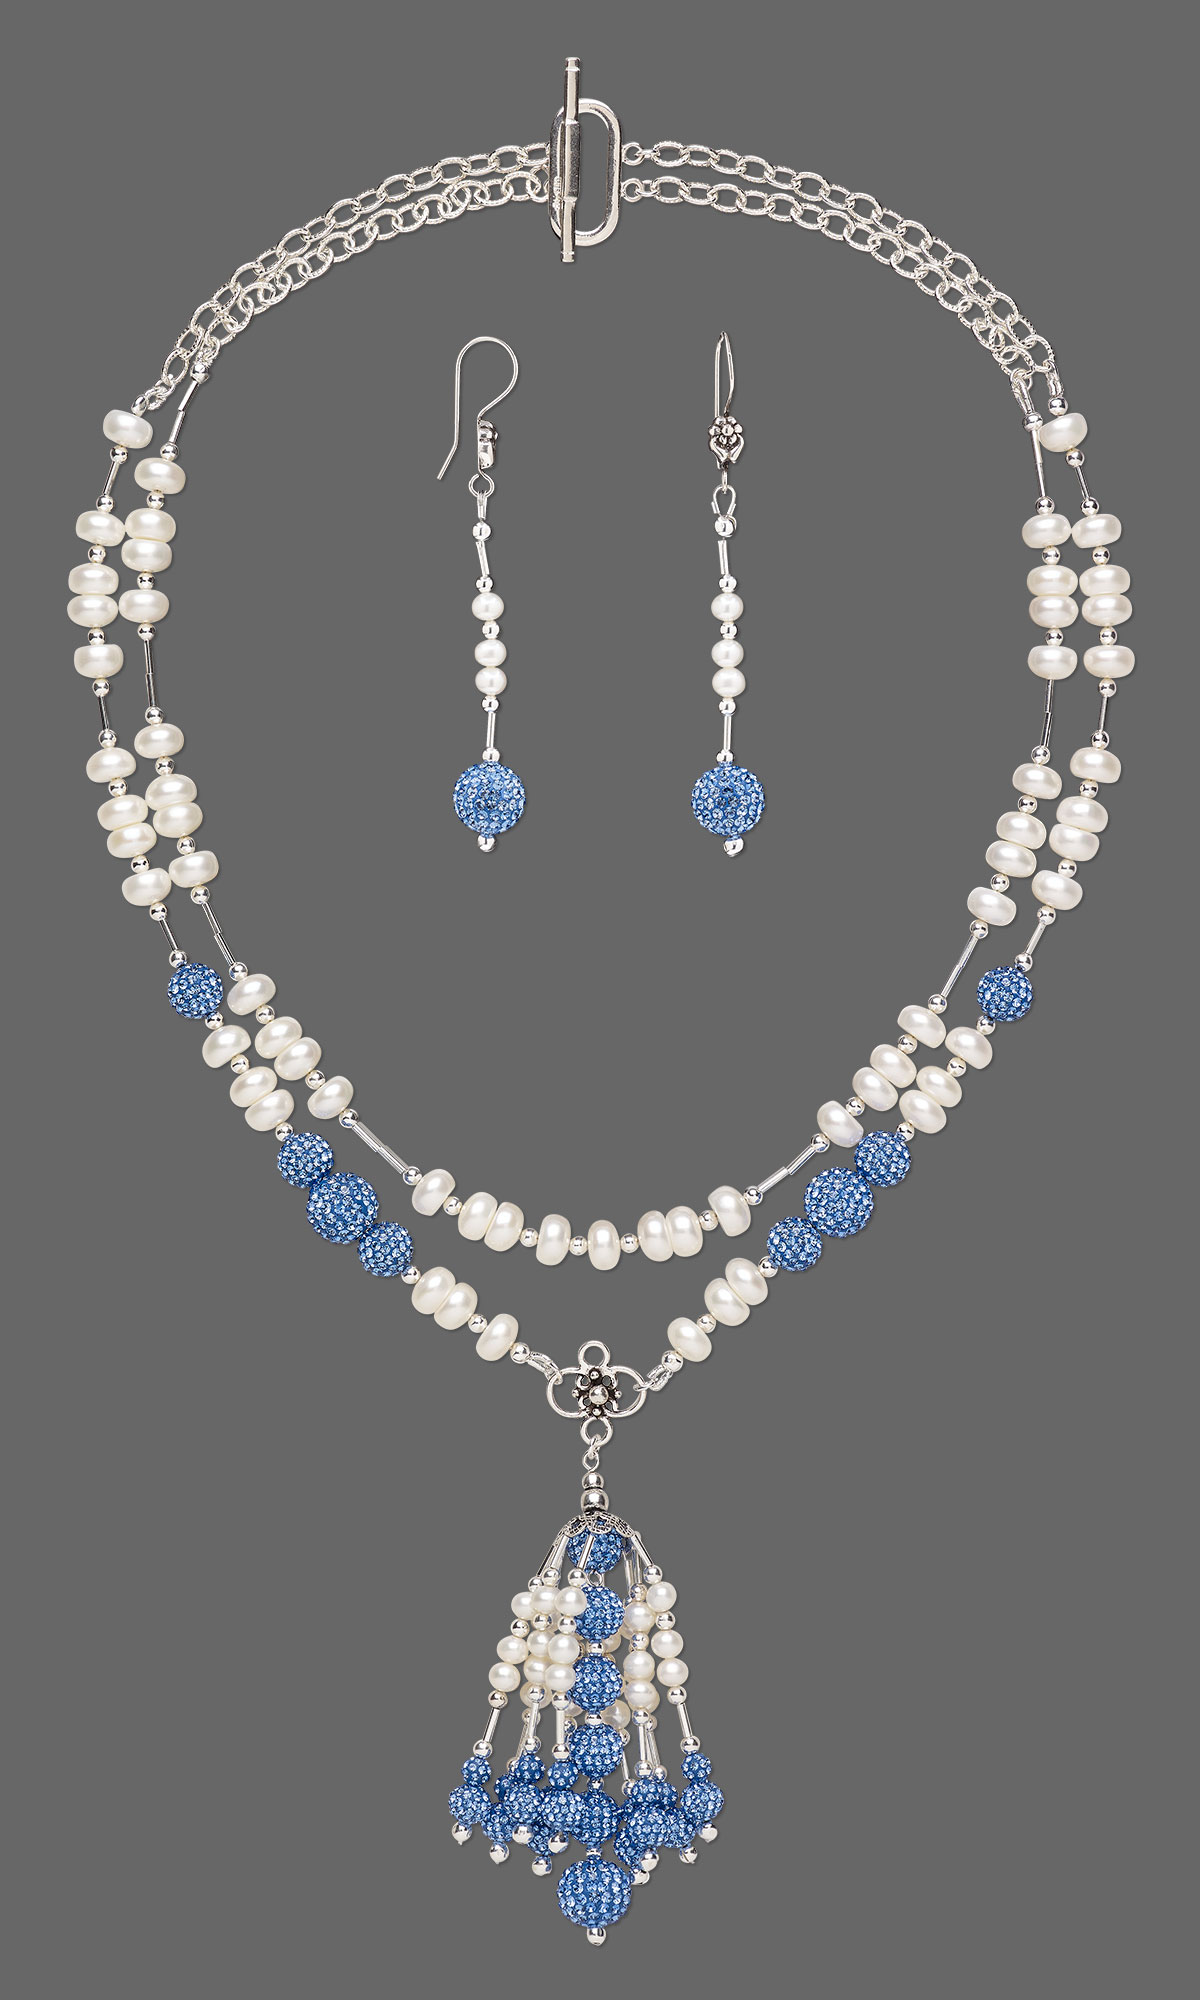 Jewelry Design - Double-Strand Necklace and Earring Set with Swarovski ...